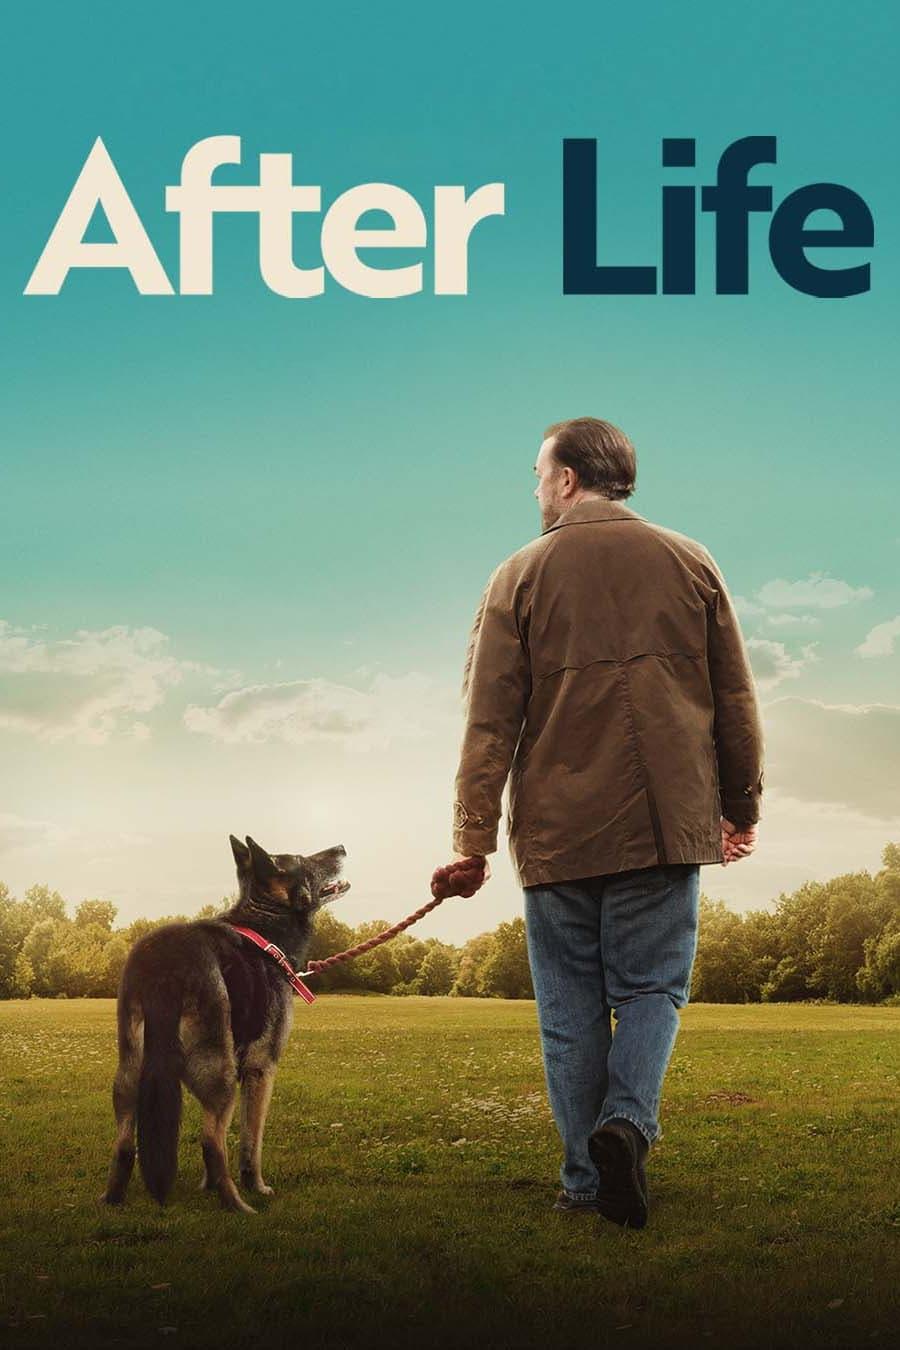 After Life poster